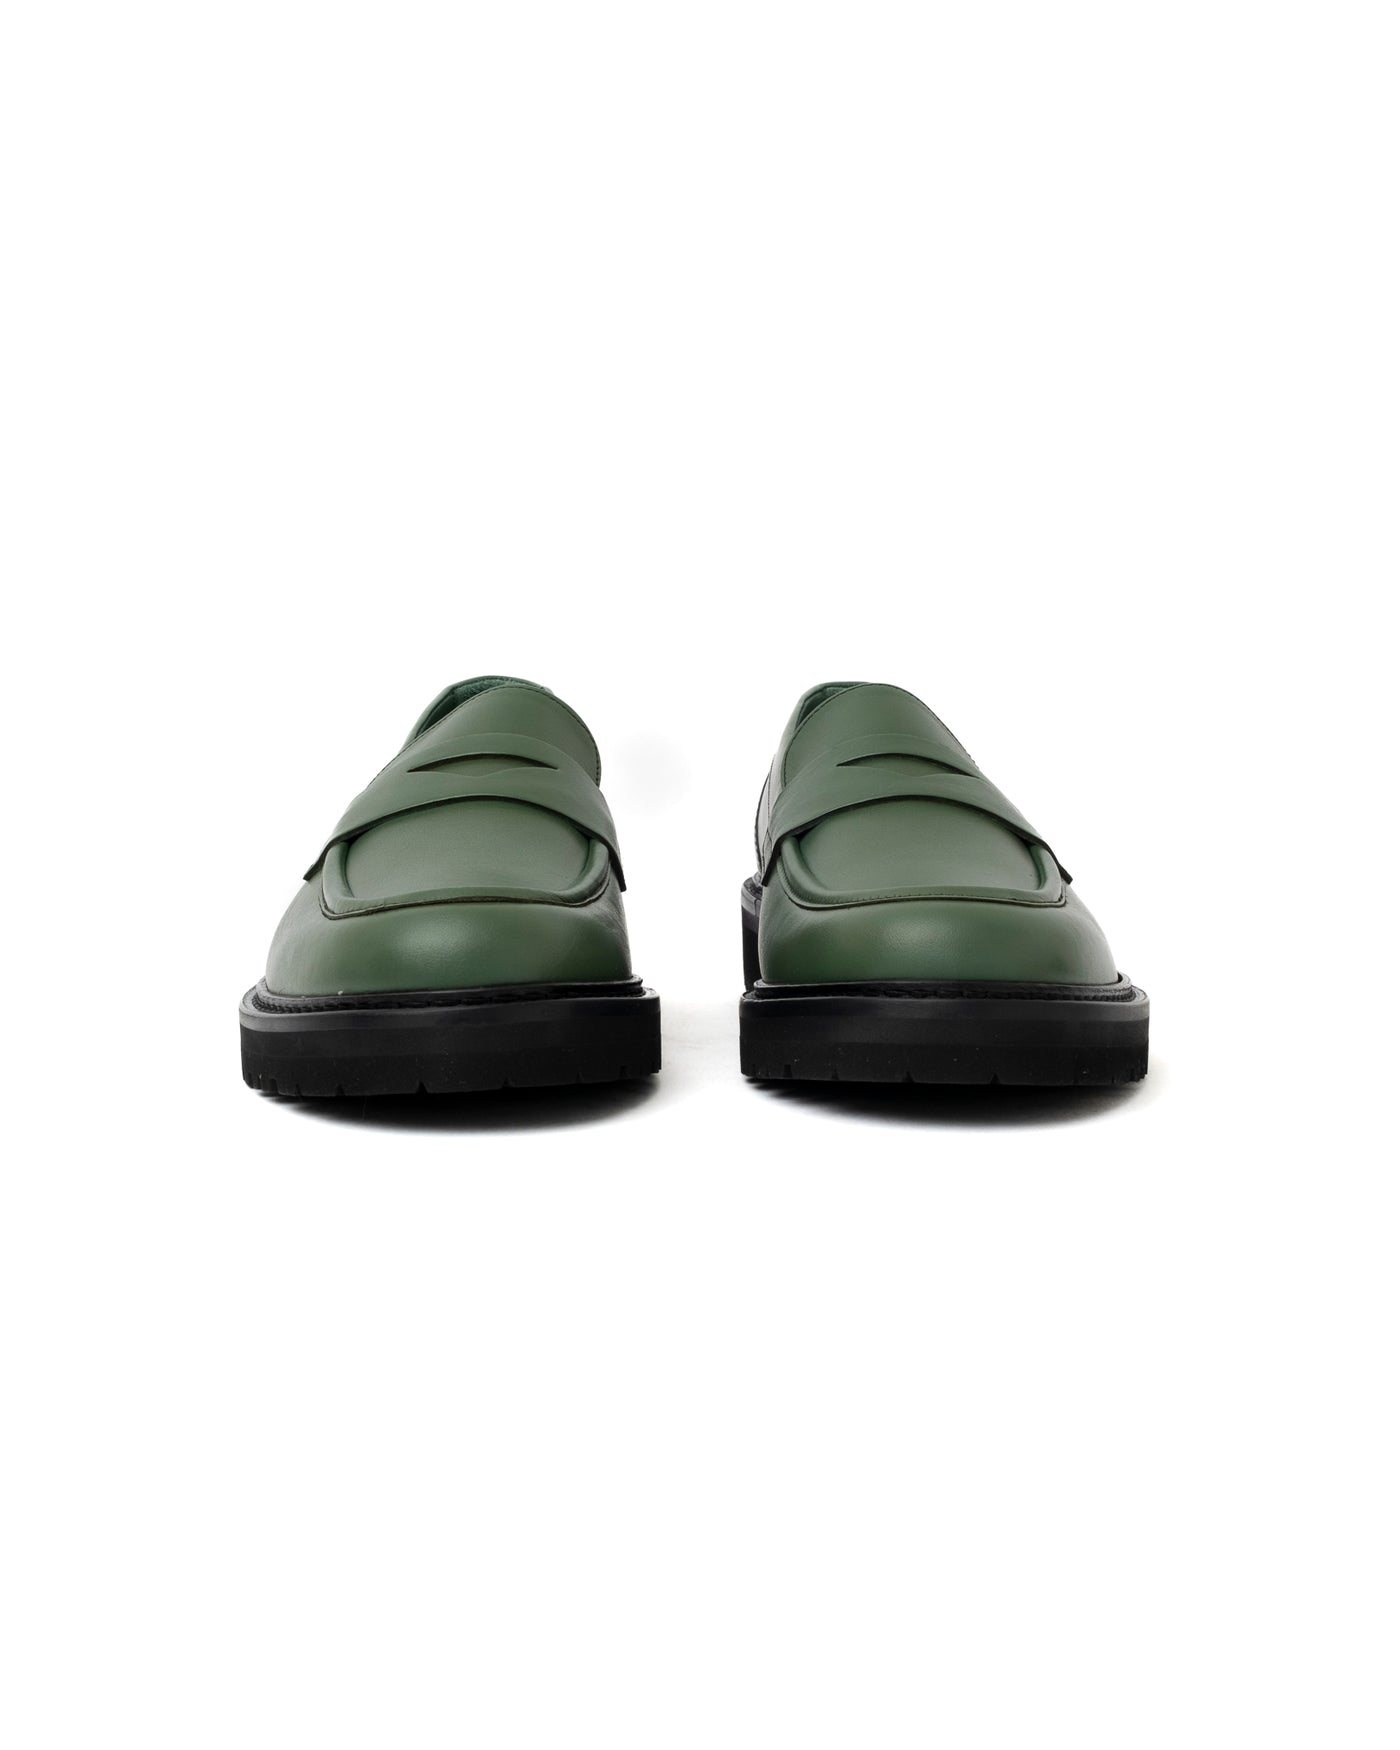 Vinny's Richee Penny Loafer Green Leather